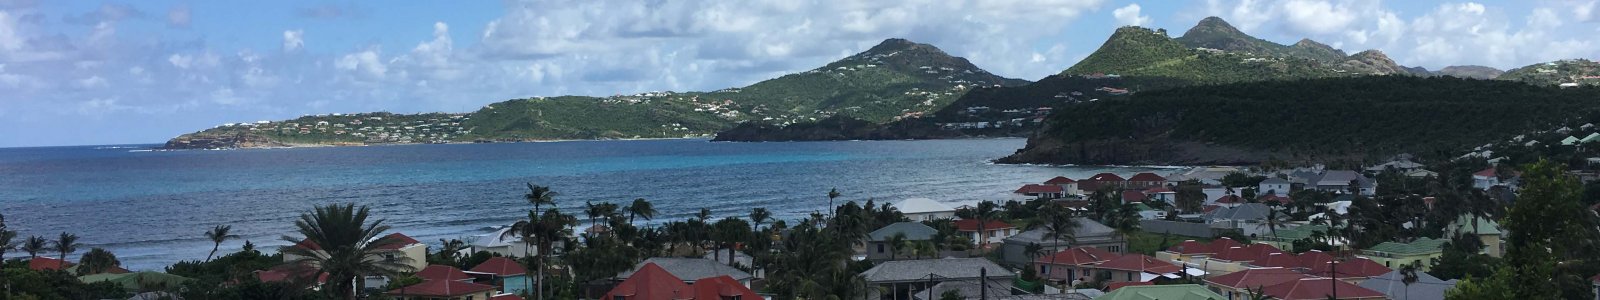 Anse des Cayes St. Barts Rentals | Luxury Amenities